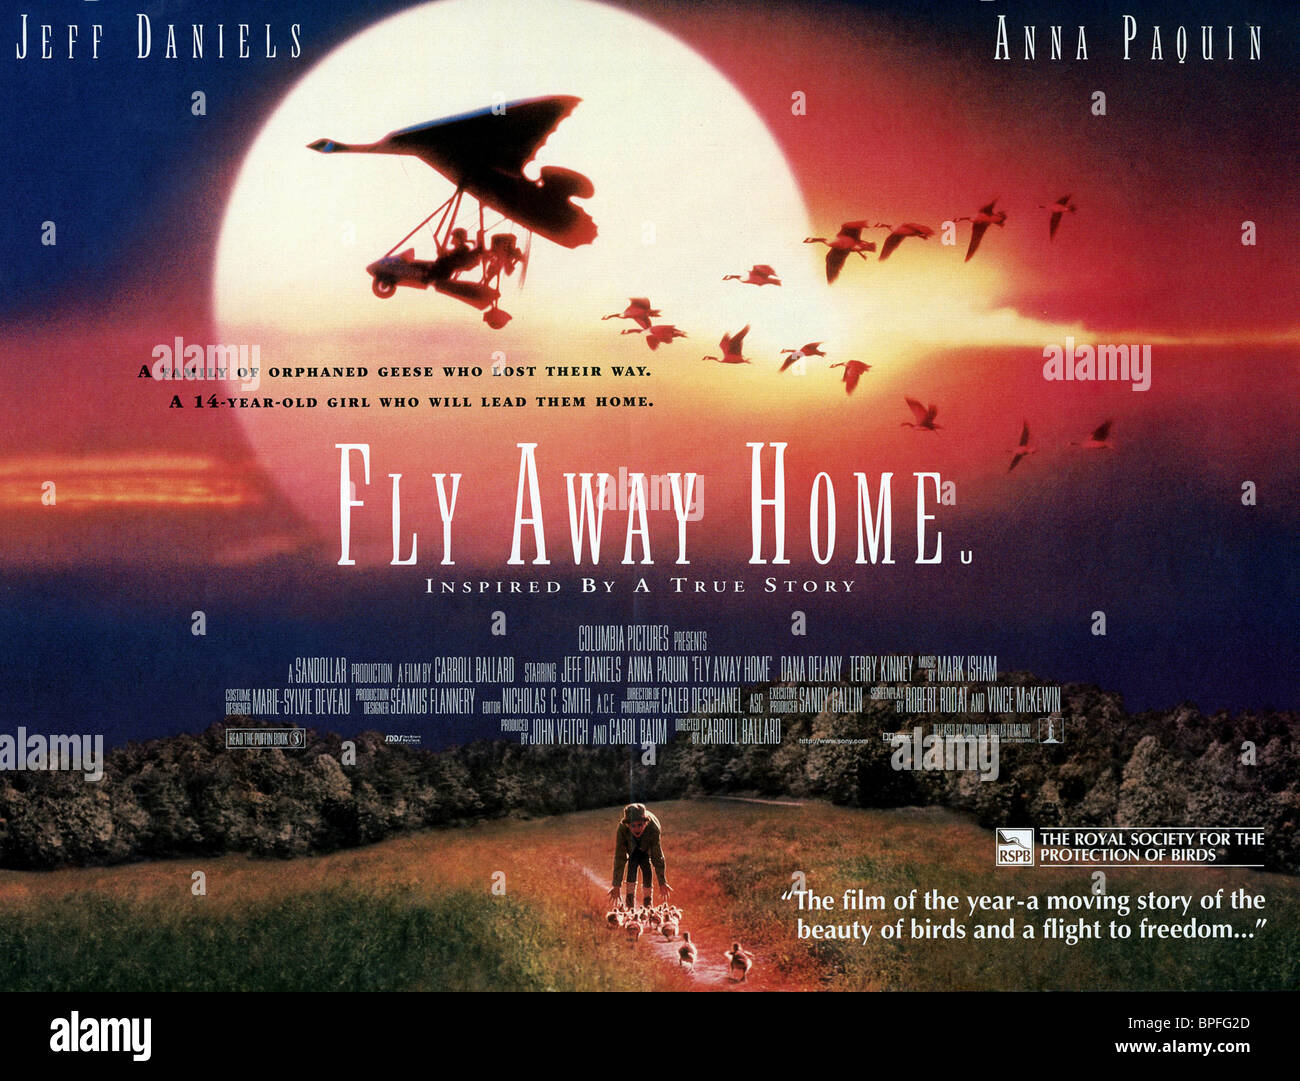 FILM POSTER FLY AWAY HOME (1996 Stock Photo - Alamy